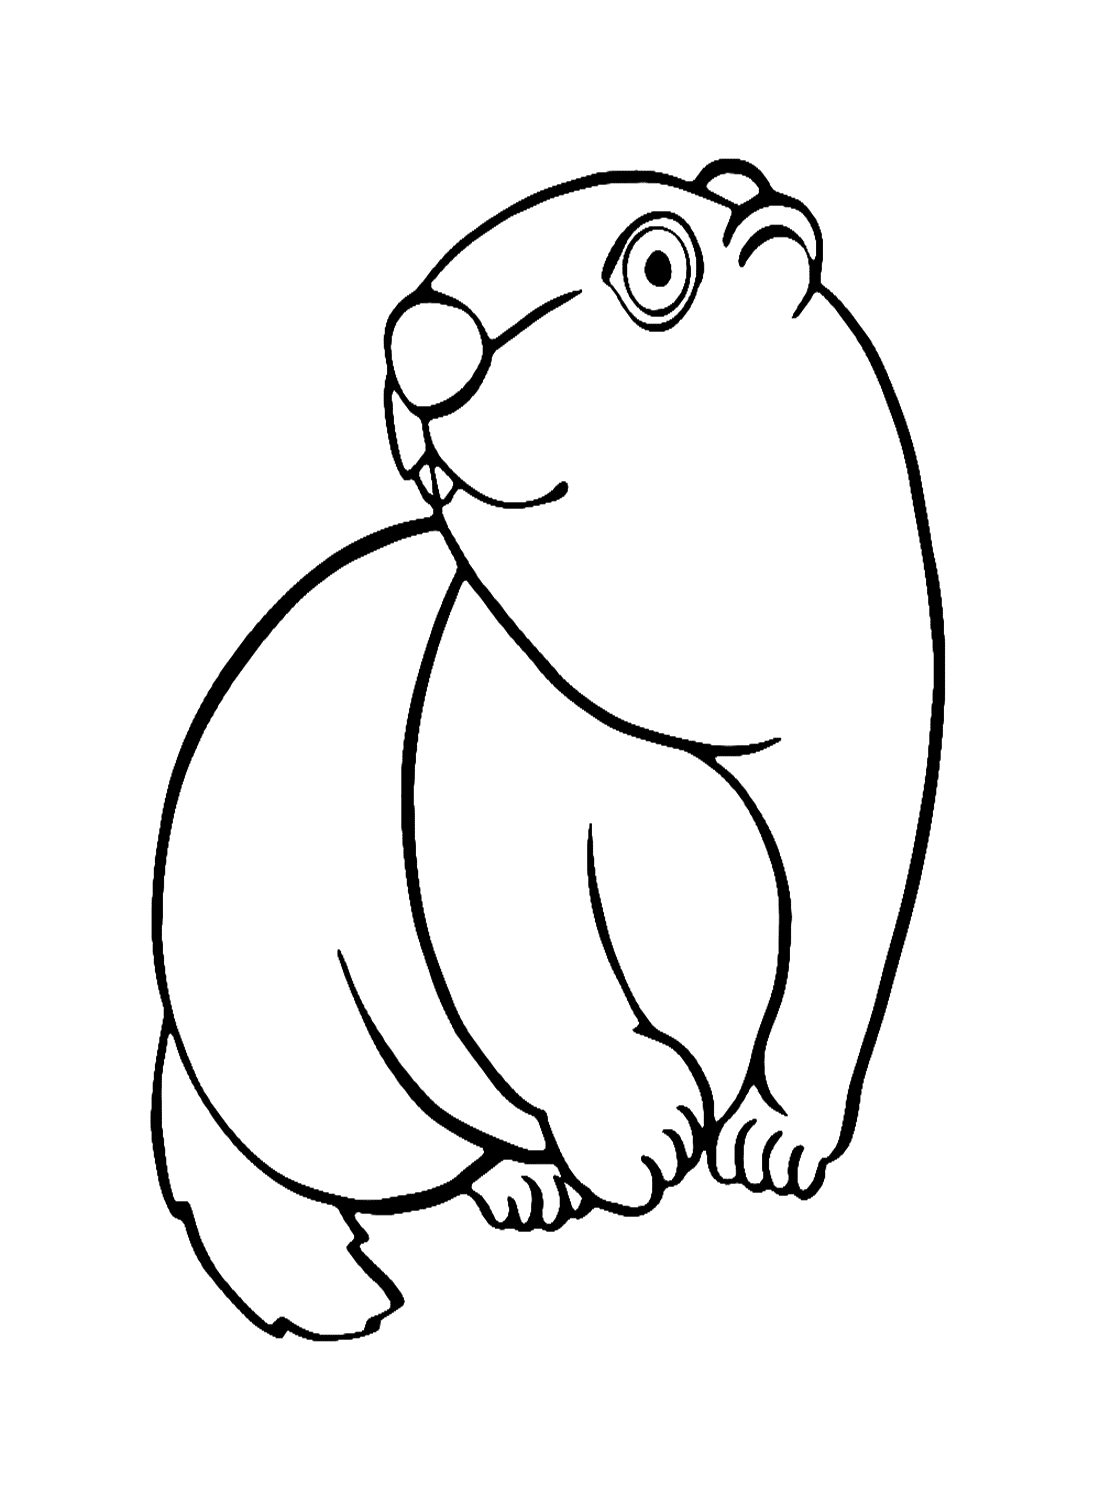 Letter M For Marmot Coloring Page - Free Printable Coloring Pages